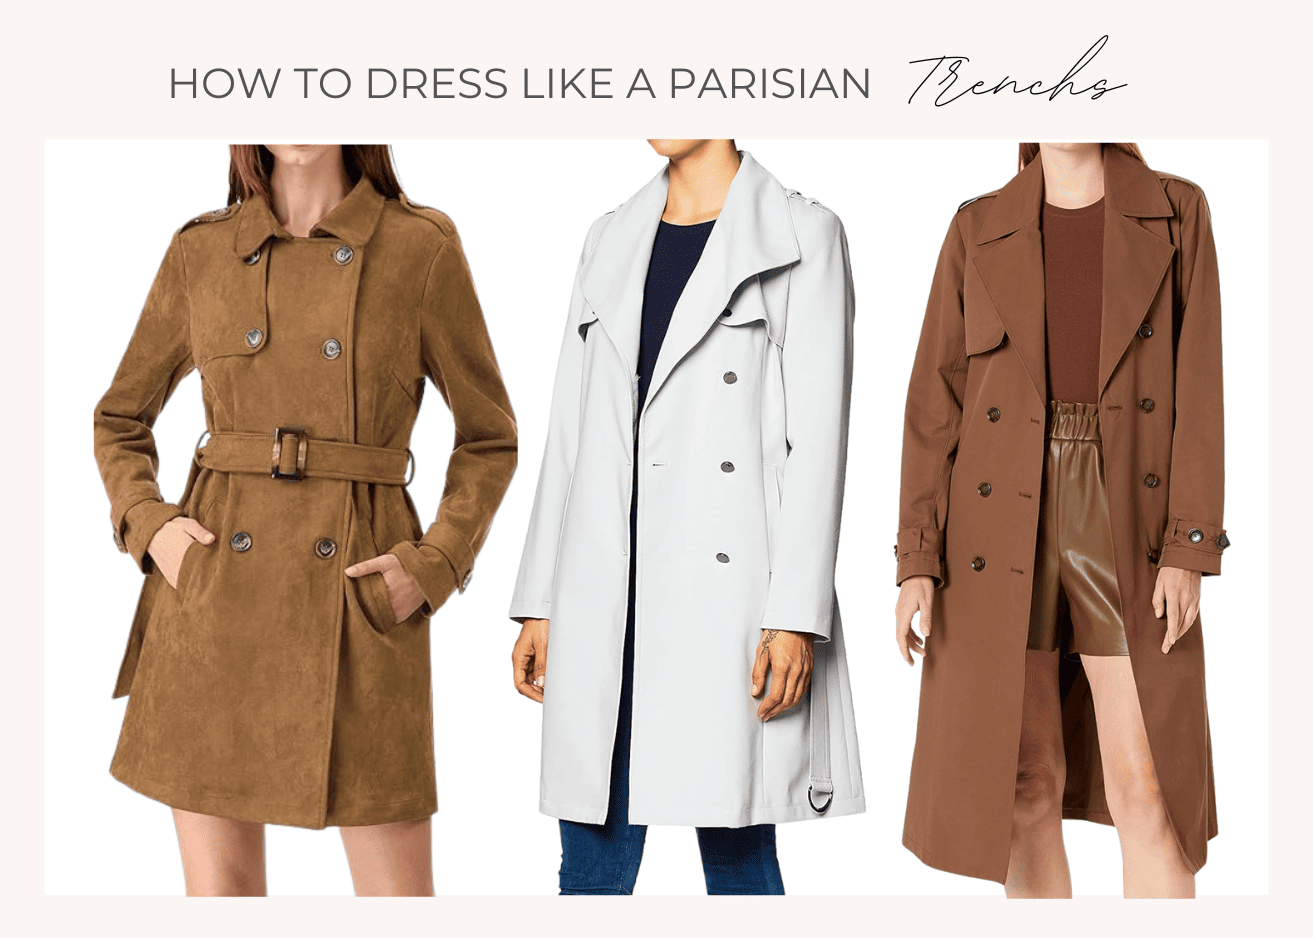 Collage image featuring trenchs titled "How to dress like a parisian trenchs"